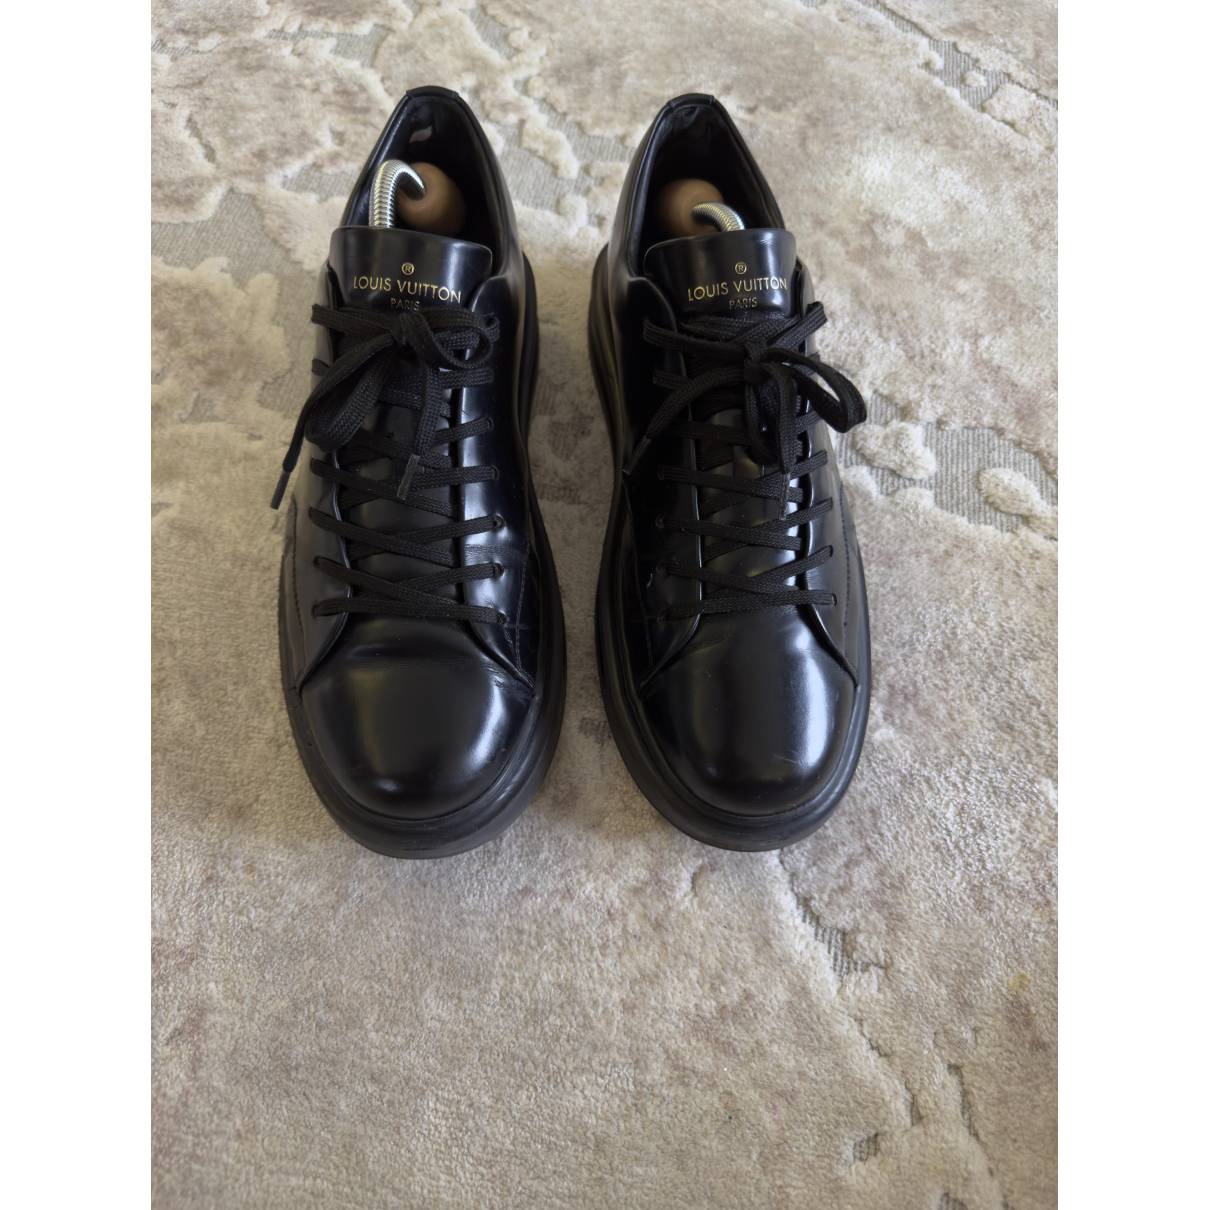 Beverly hills leather low trainers Louis Vuitton Black size 6 UK